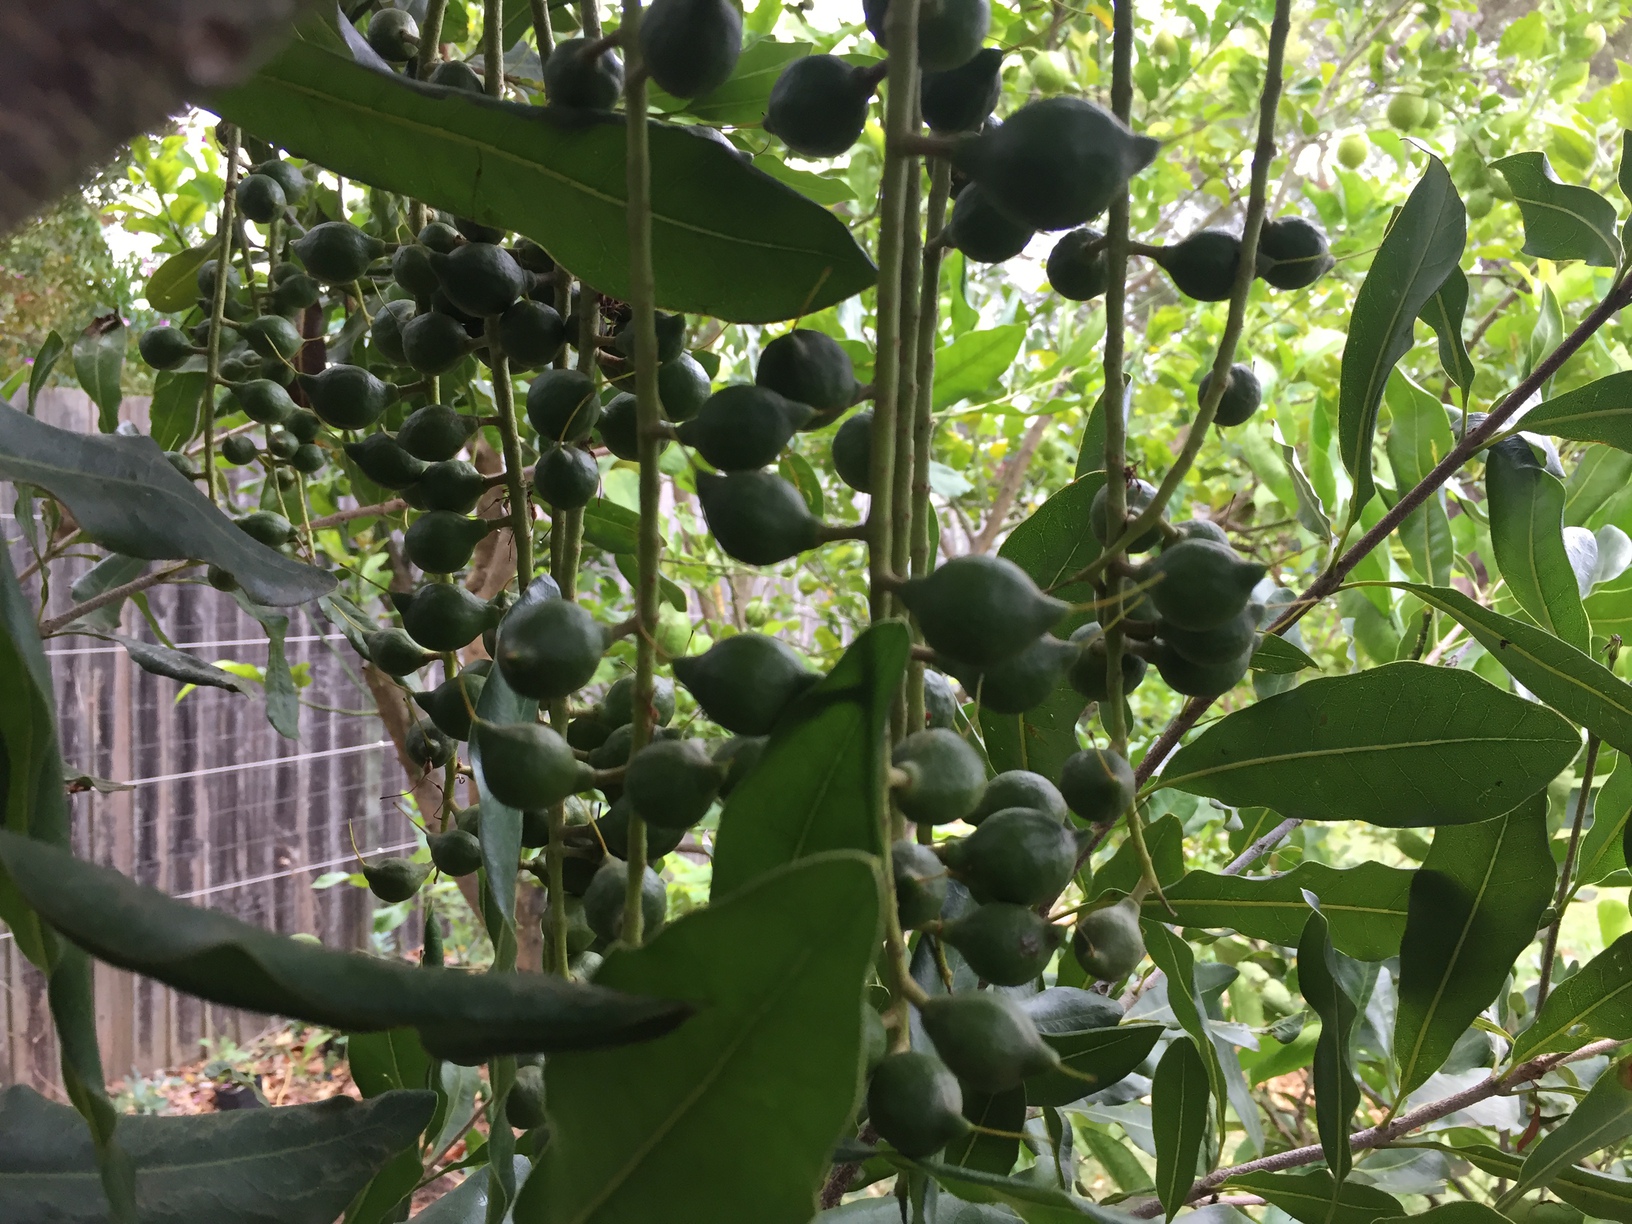 Green Macadamia nuts hanging in bunches around the tree